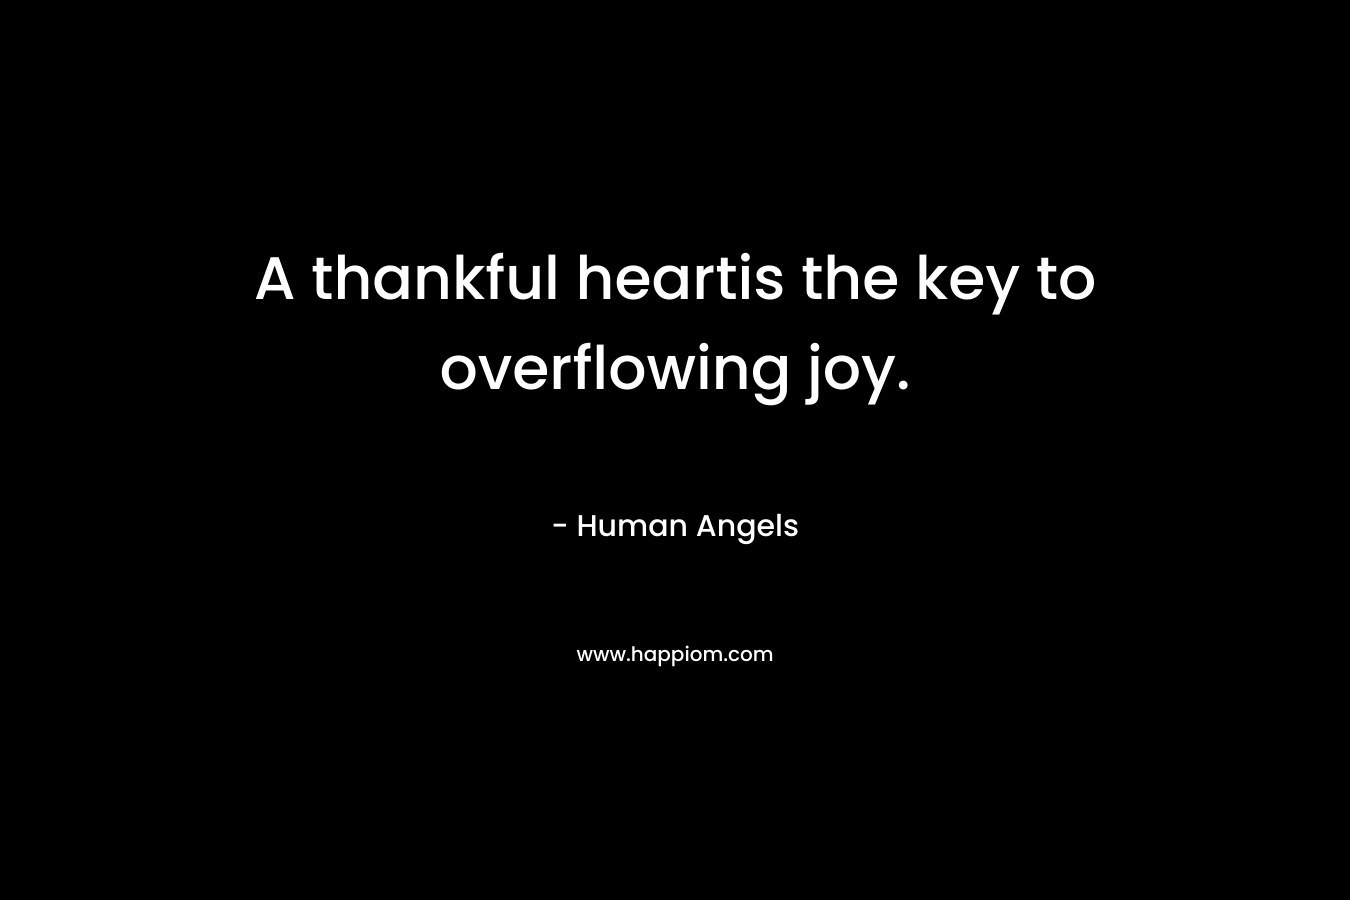 A thankful heartis the key to overflowing joy. – Human Angels